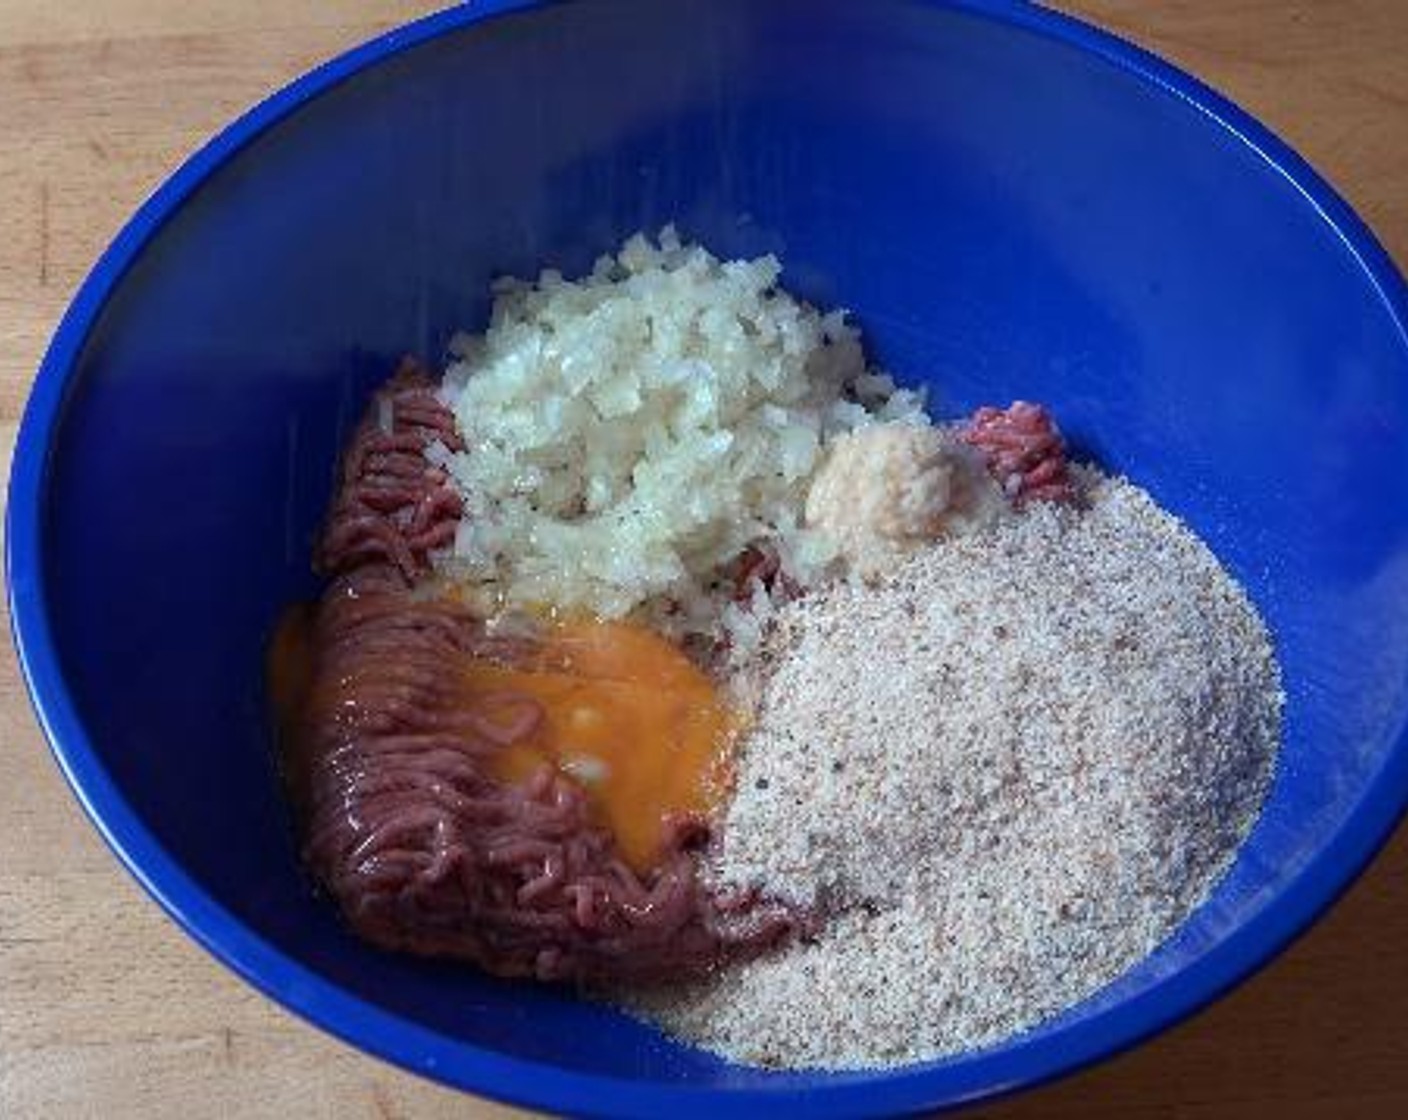 step 1 Inside a big bowl, add the Ground Beef (1.1 lb), Onion (1/2), Garlic (1 clove), Breadcrumbs (1/2 cup), Egg (1), Salt (to taste), and Ground Black Pepper (to taste). Using your hands mix everything together until it is nicely combined.